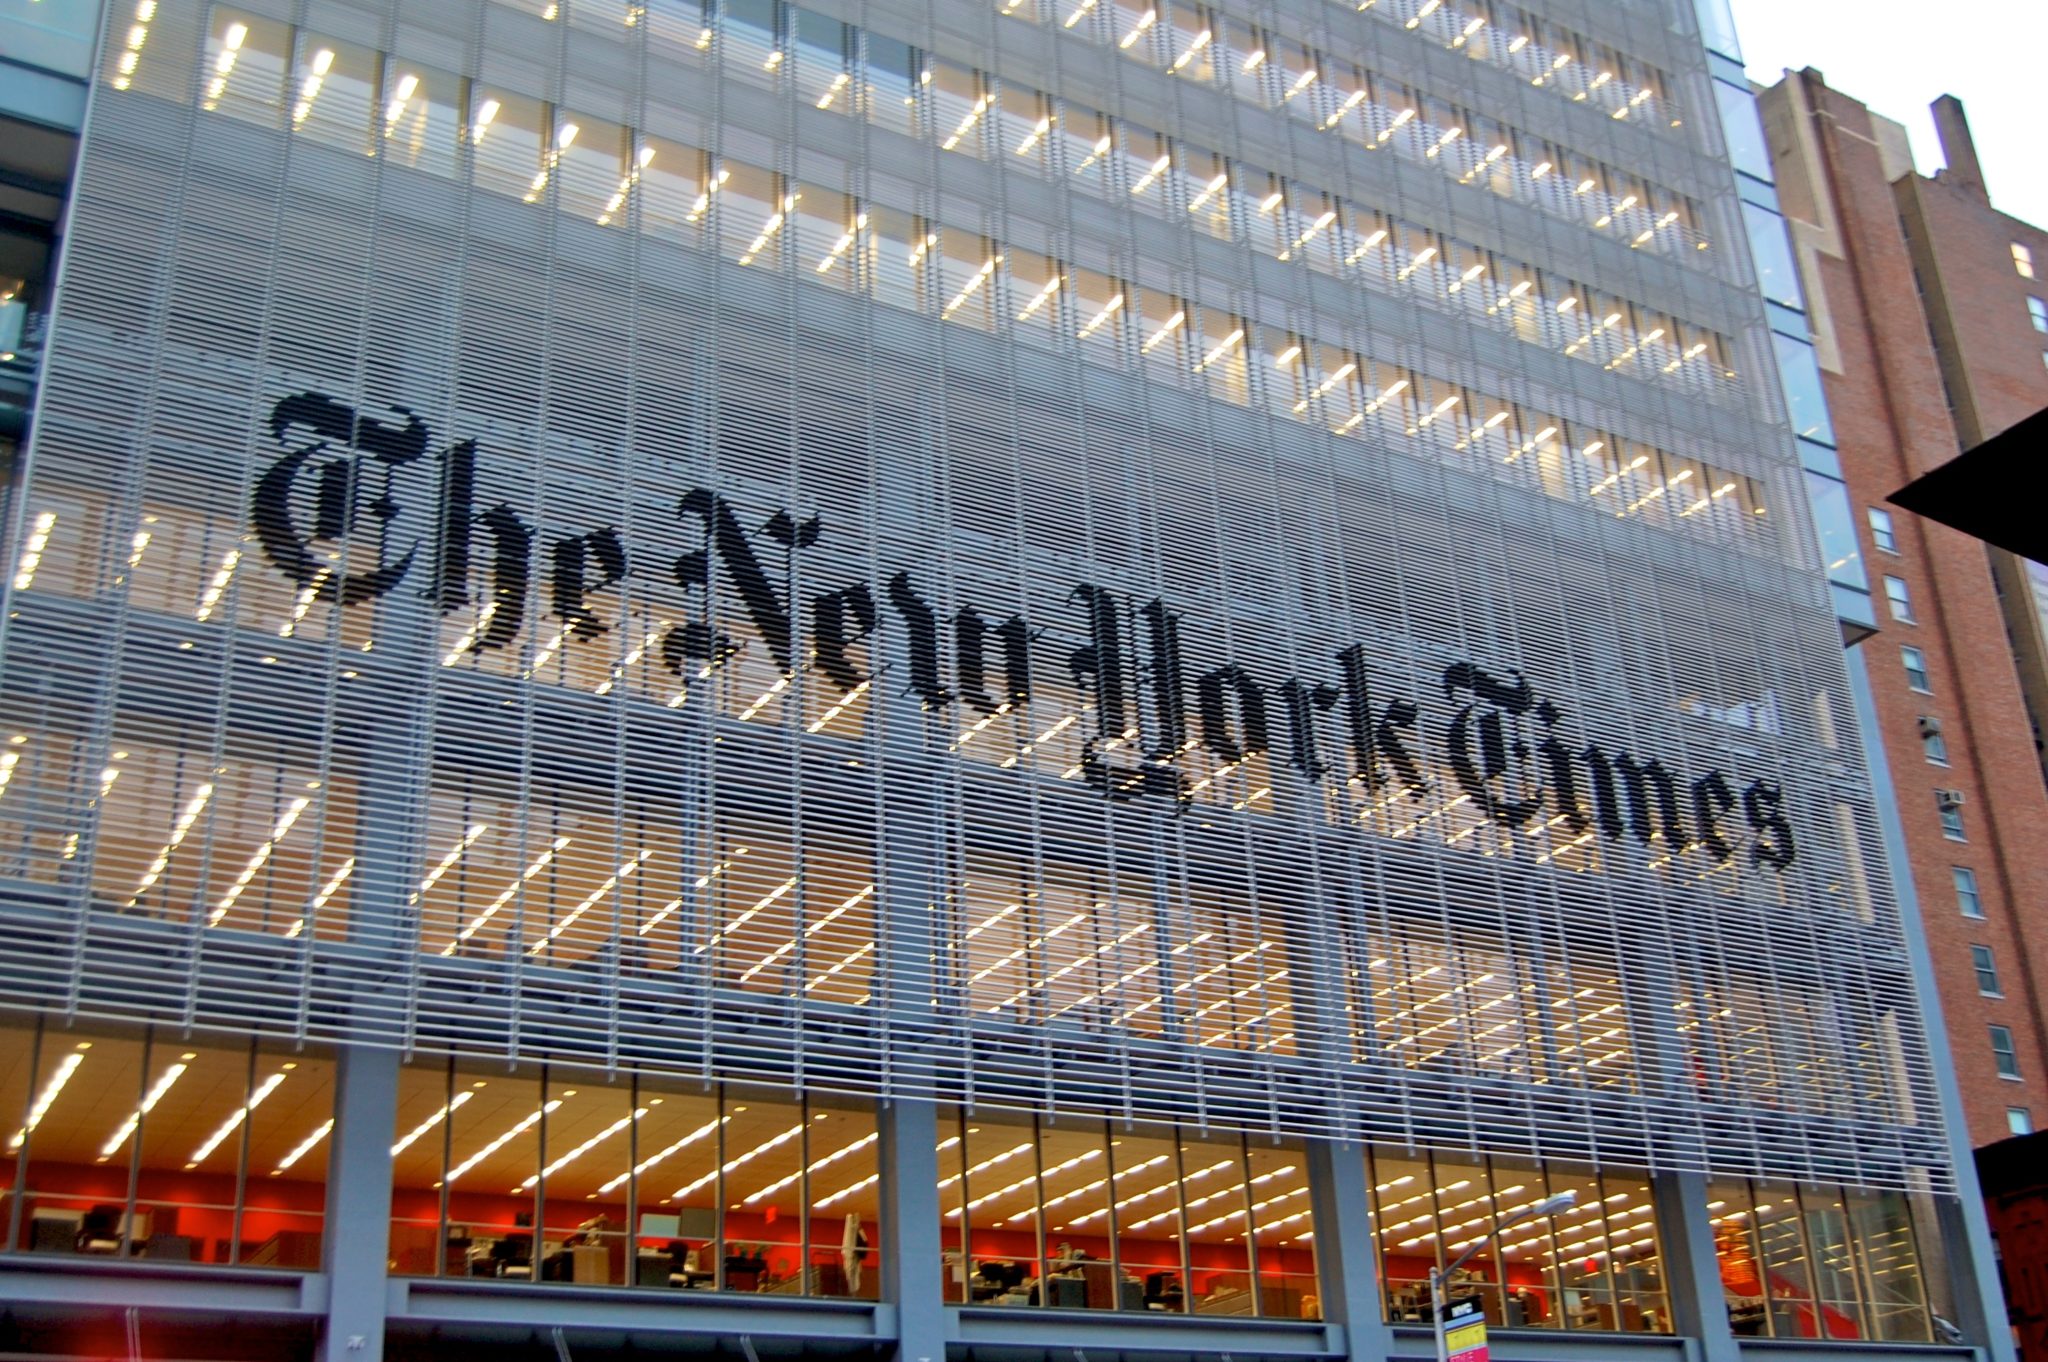 Great News for Native: The New York Times’ Sponsored Content Is as Popular as Its Editorial